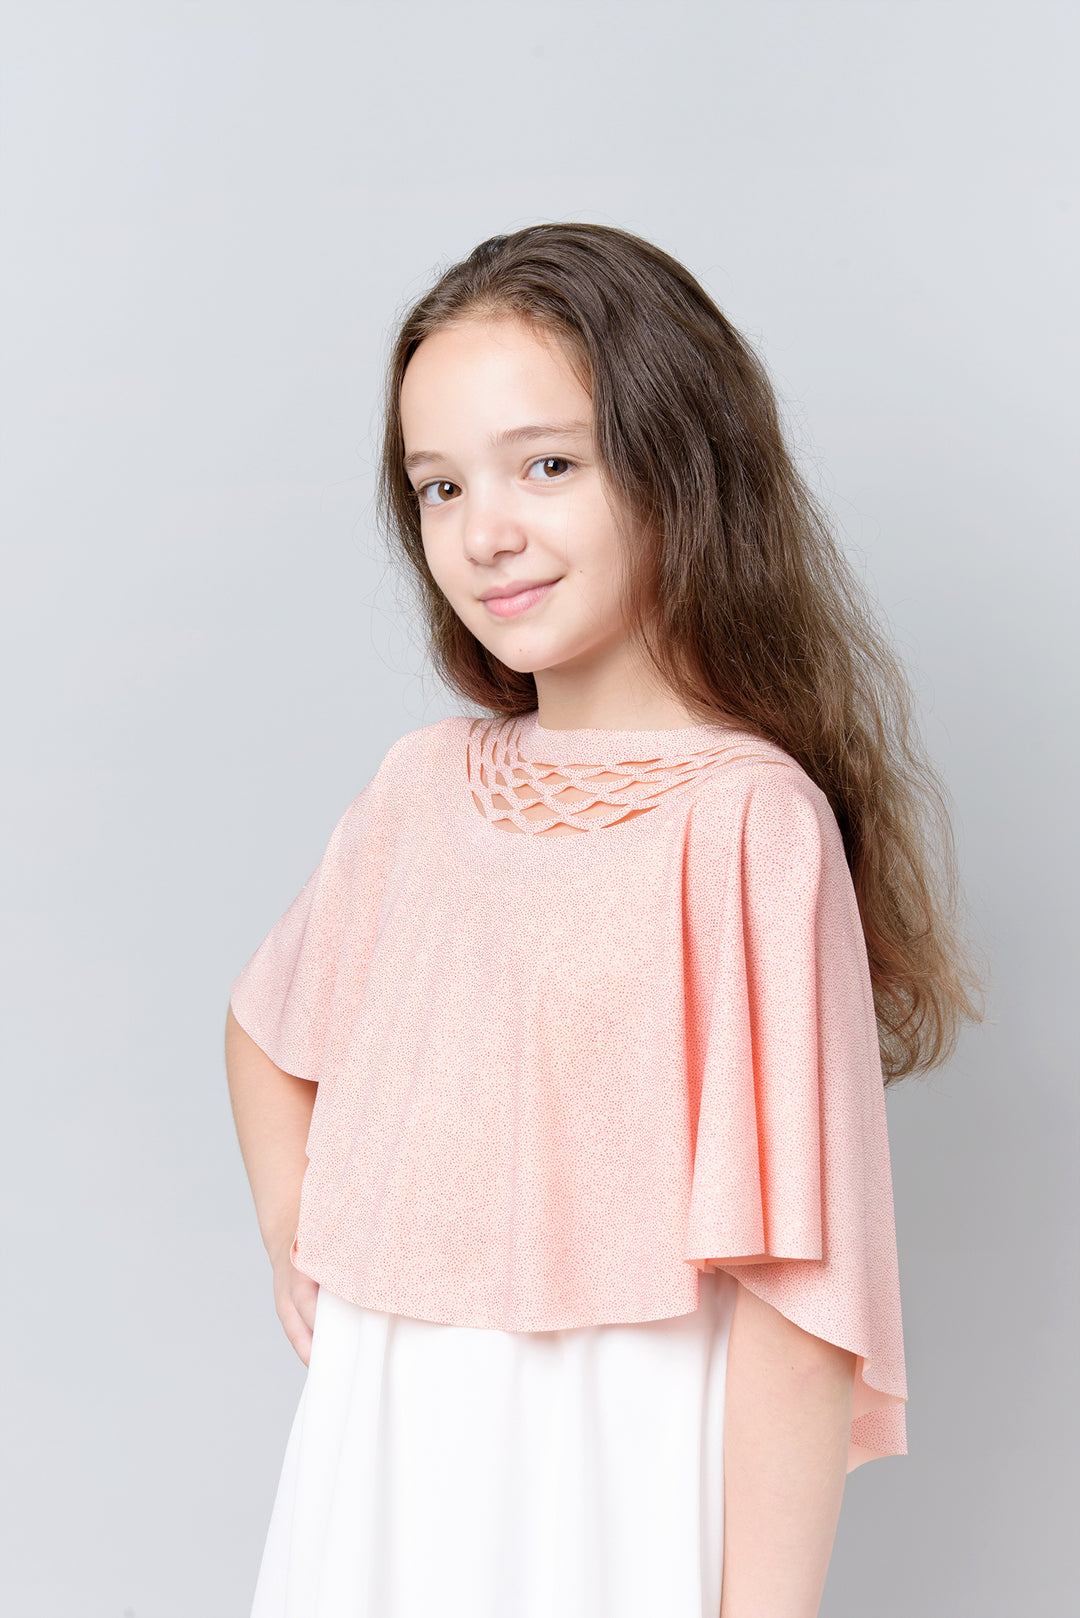 Top for an event for a girl - peach pink top - glittery top for a girl